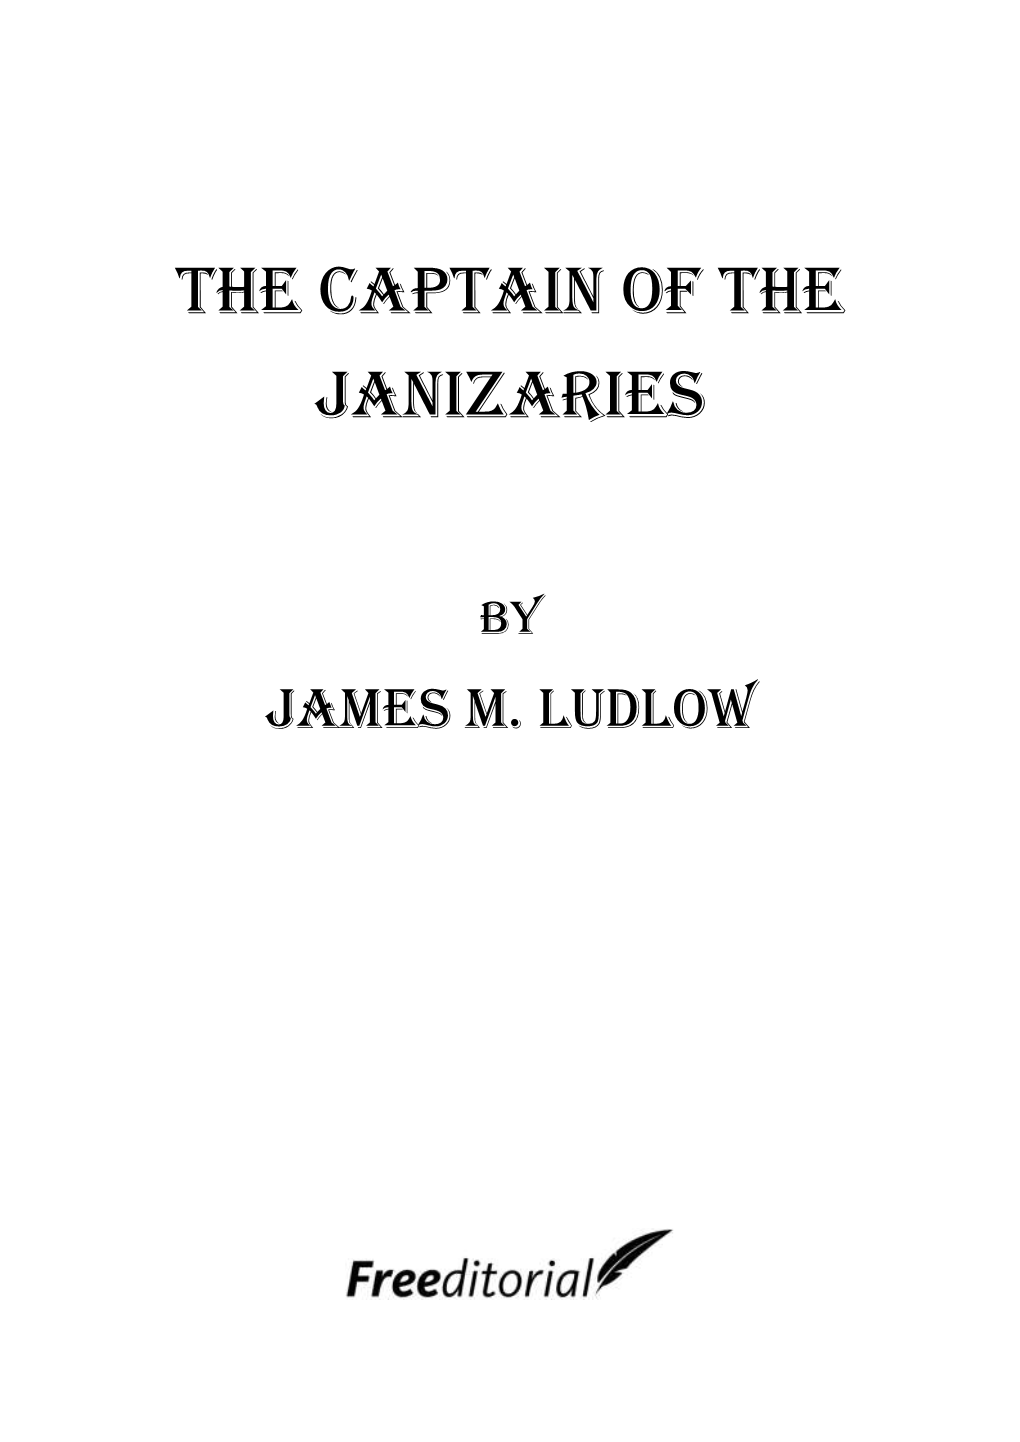 The Captain of the Janizaries